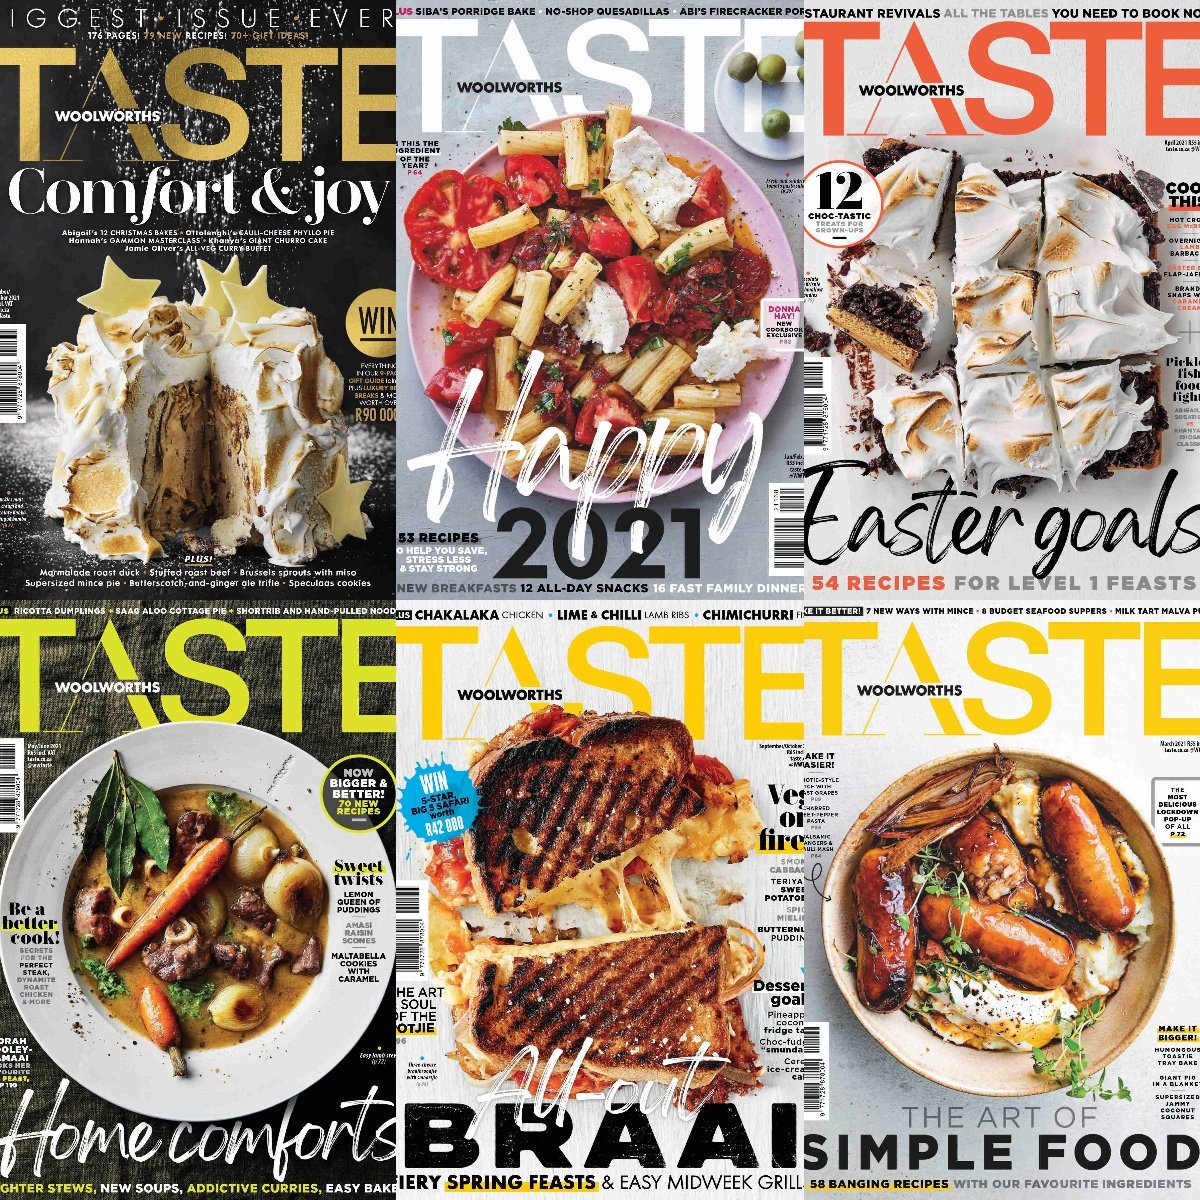 Woolworths Taste – Full Year 2021 Issues Collection